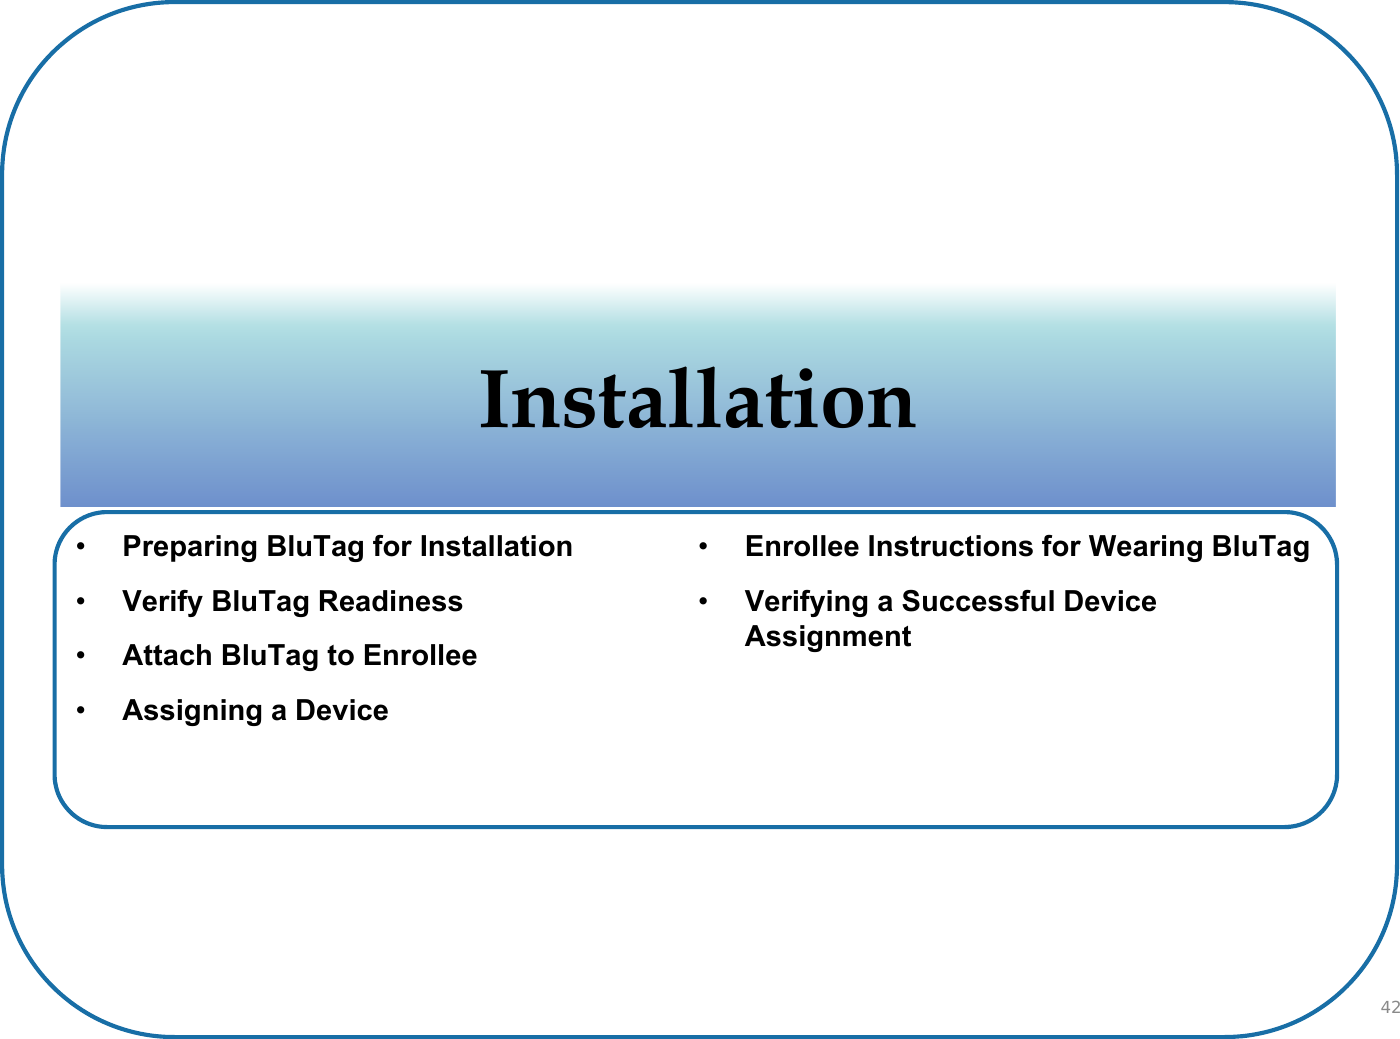 InstallationInstallation•Preparing BluTag for Installation•Verify BluTag Readiness•Attach BluTag to Enrollee•Assigning a Device•Enrollee Instructions for Wearing BluTag•Verifying a Successful Device Assignment42